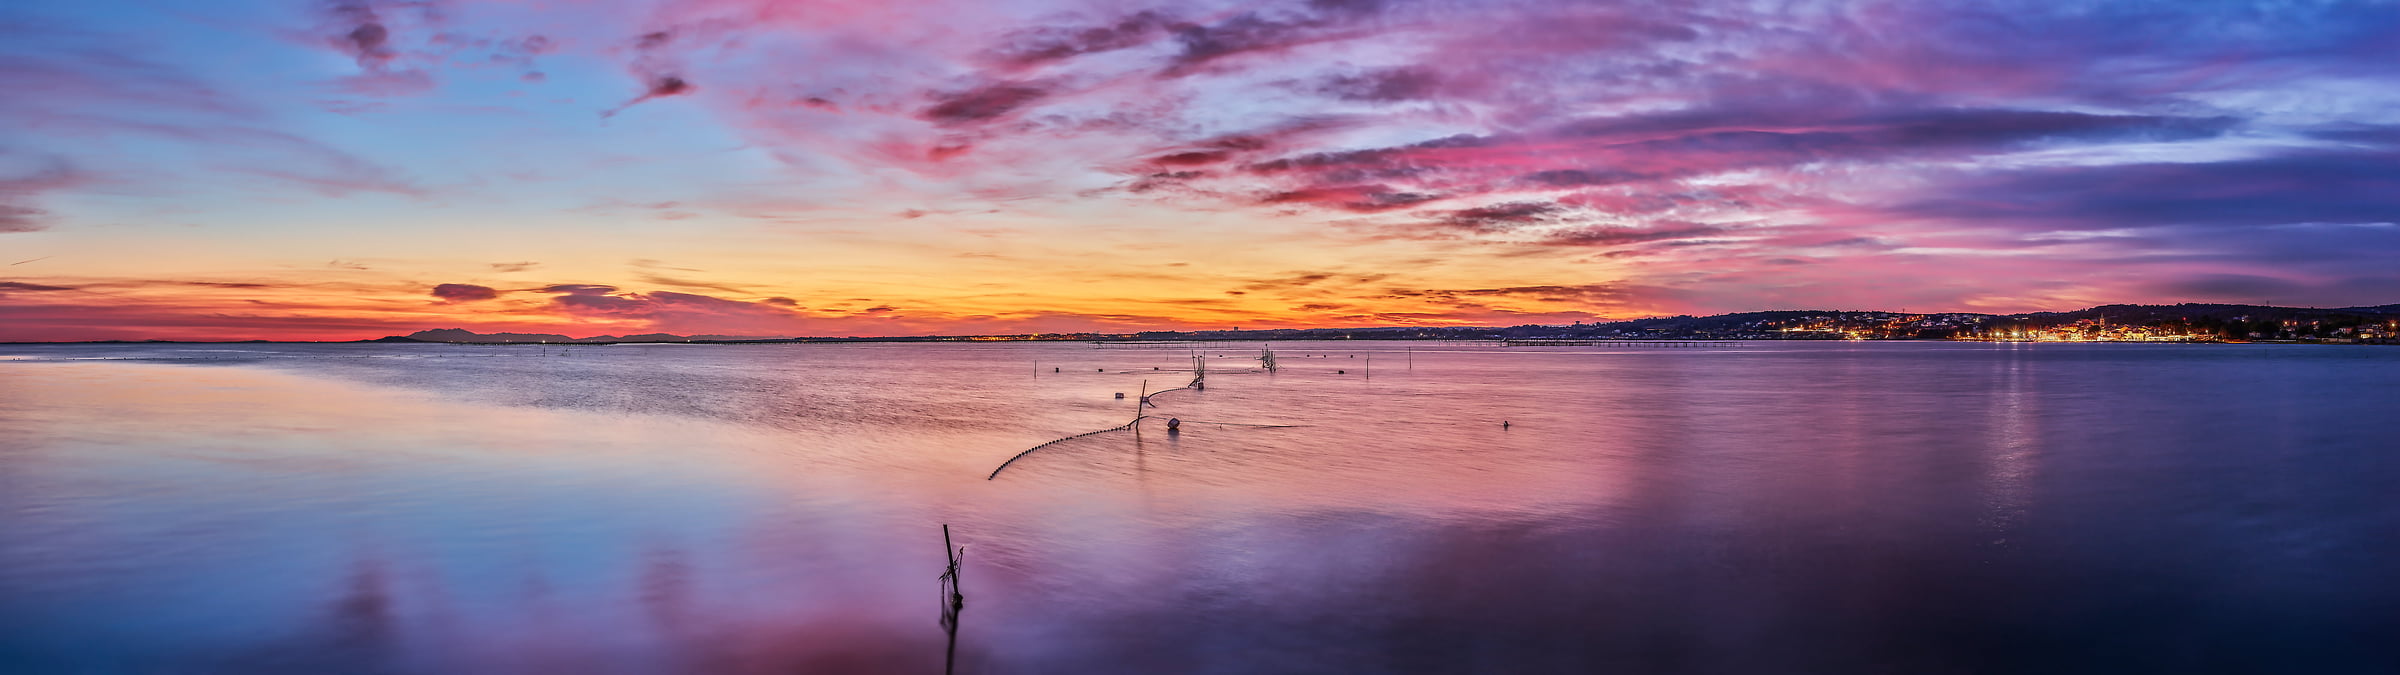 288 megapixels! A very high resolution, large-format VAST photo print of a sunset over water; seascape photograph created by David Meaux in Étang de Thau, Balaruc-les-Bains, l'Hérault, France.